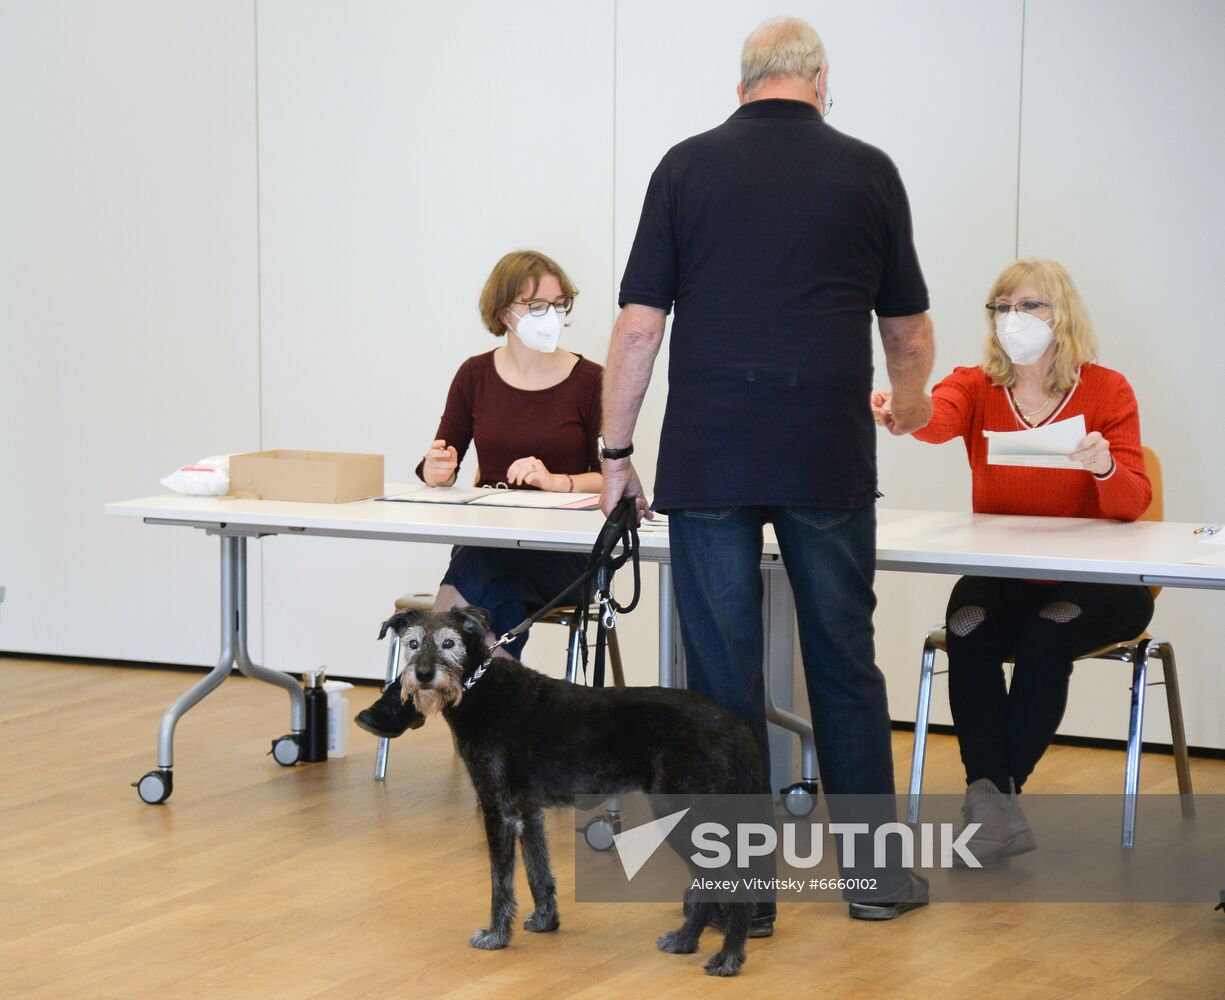 Germany Parliamentary Elections